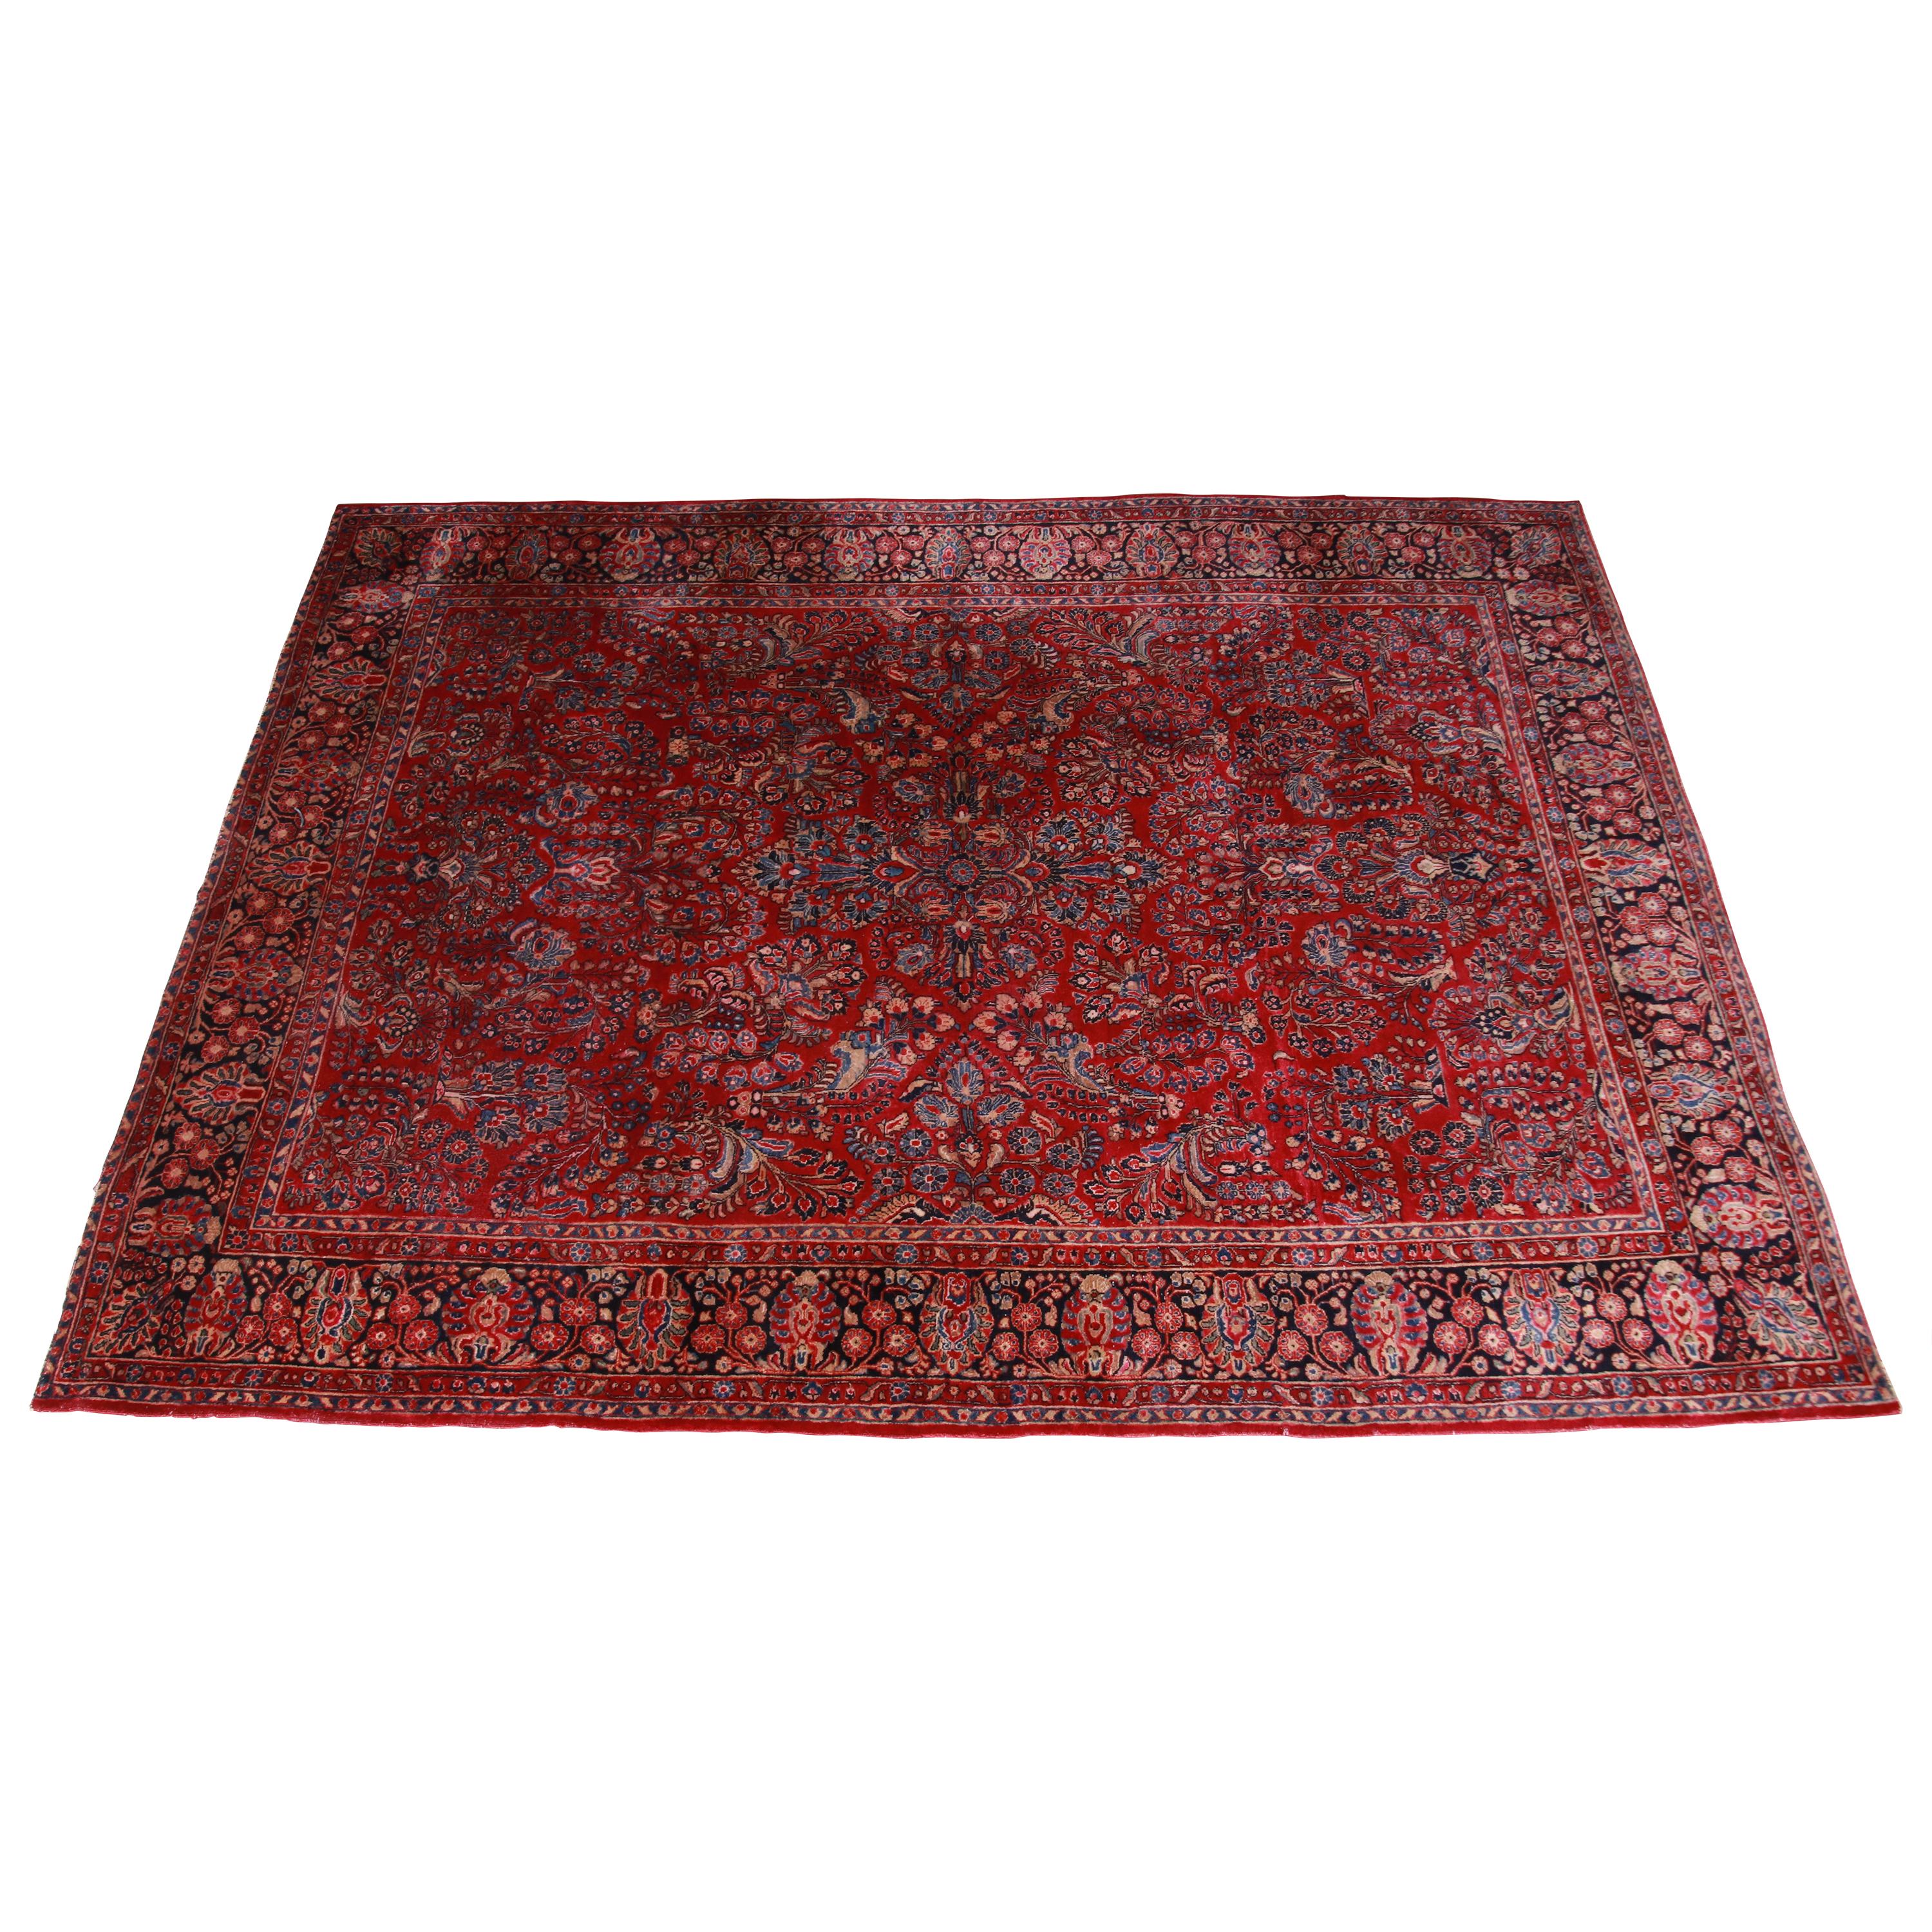 Antique Hand Knotted Persian Sarouk Rug, circa 1930s